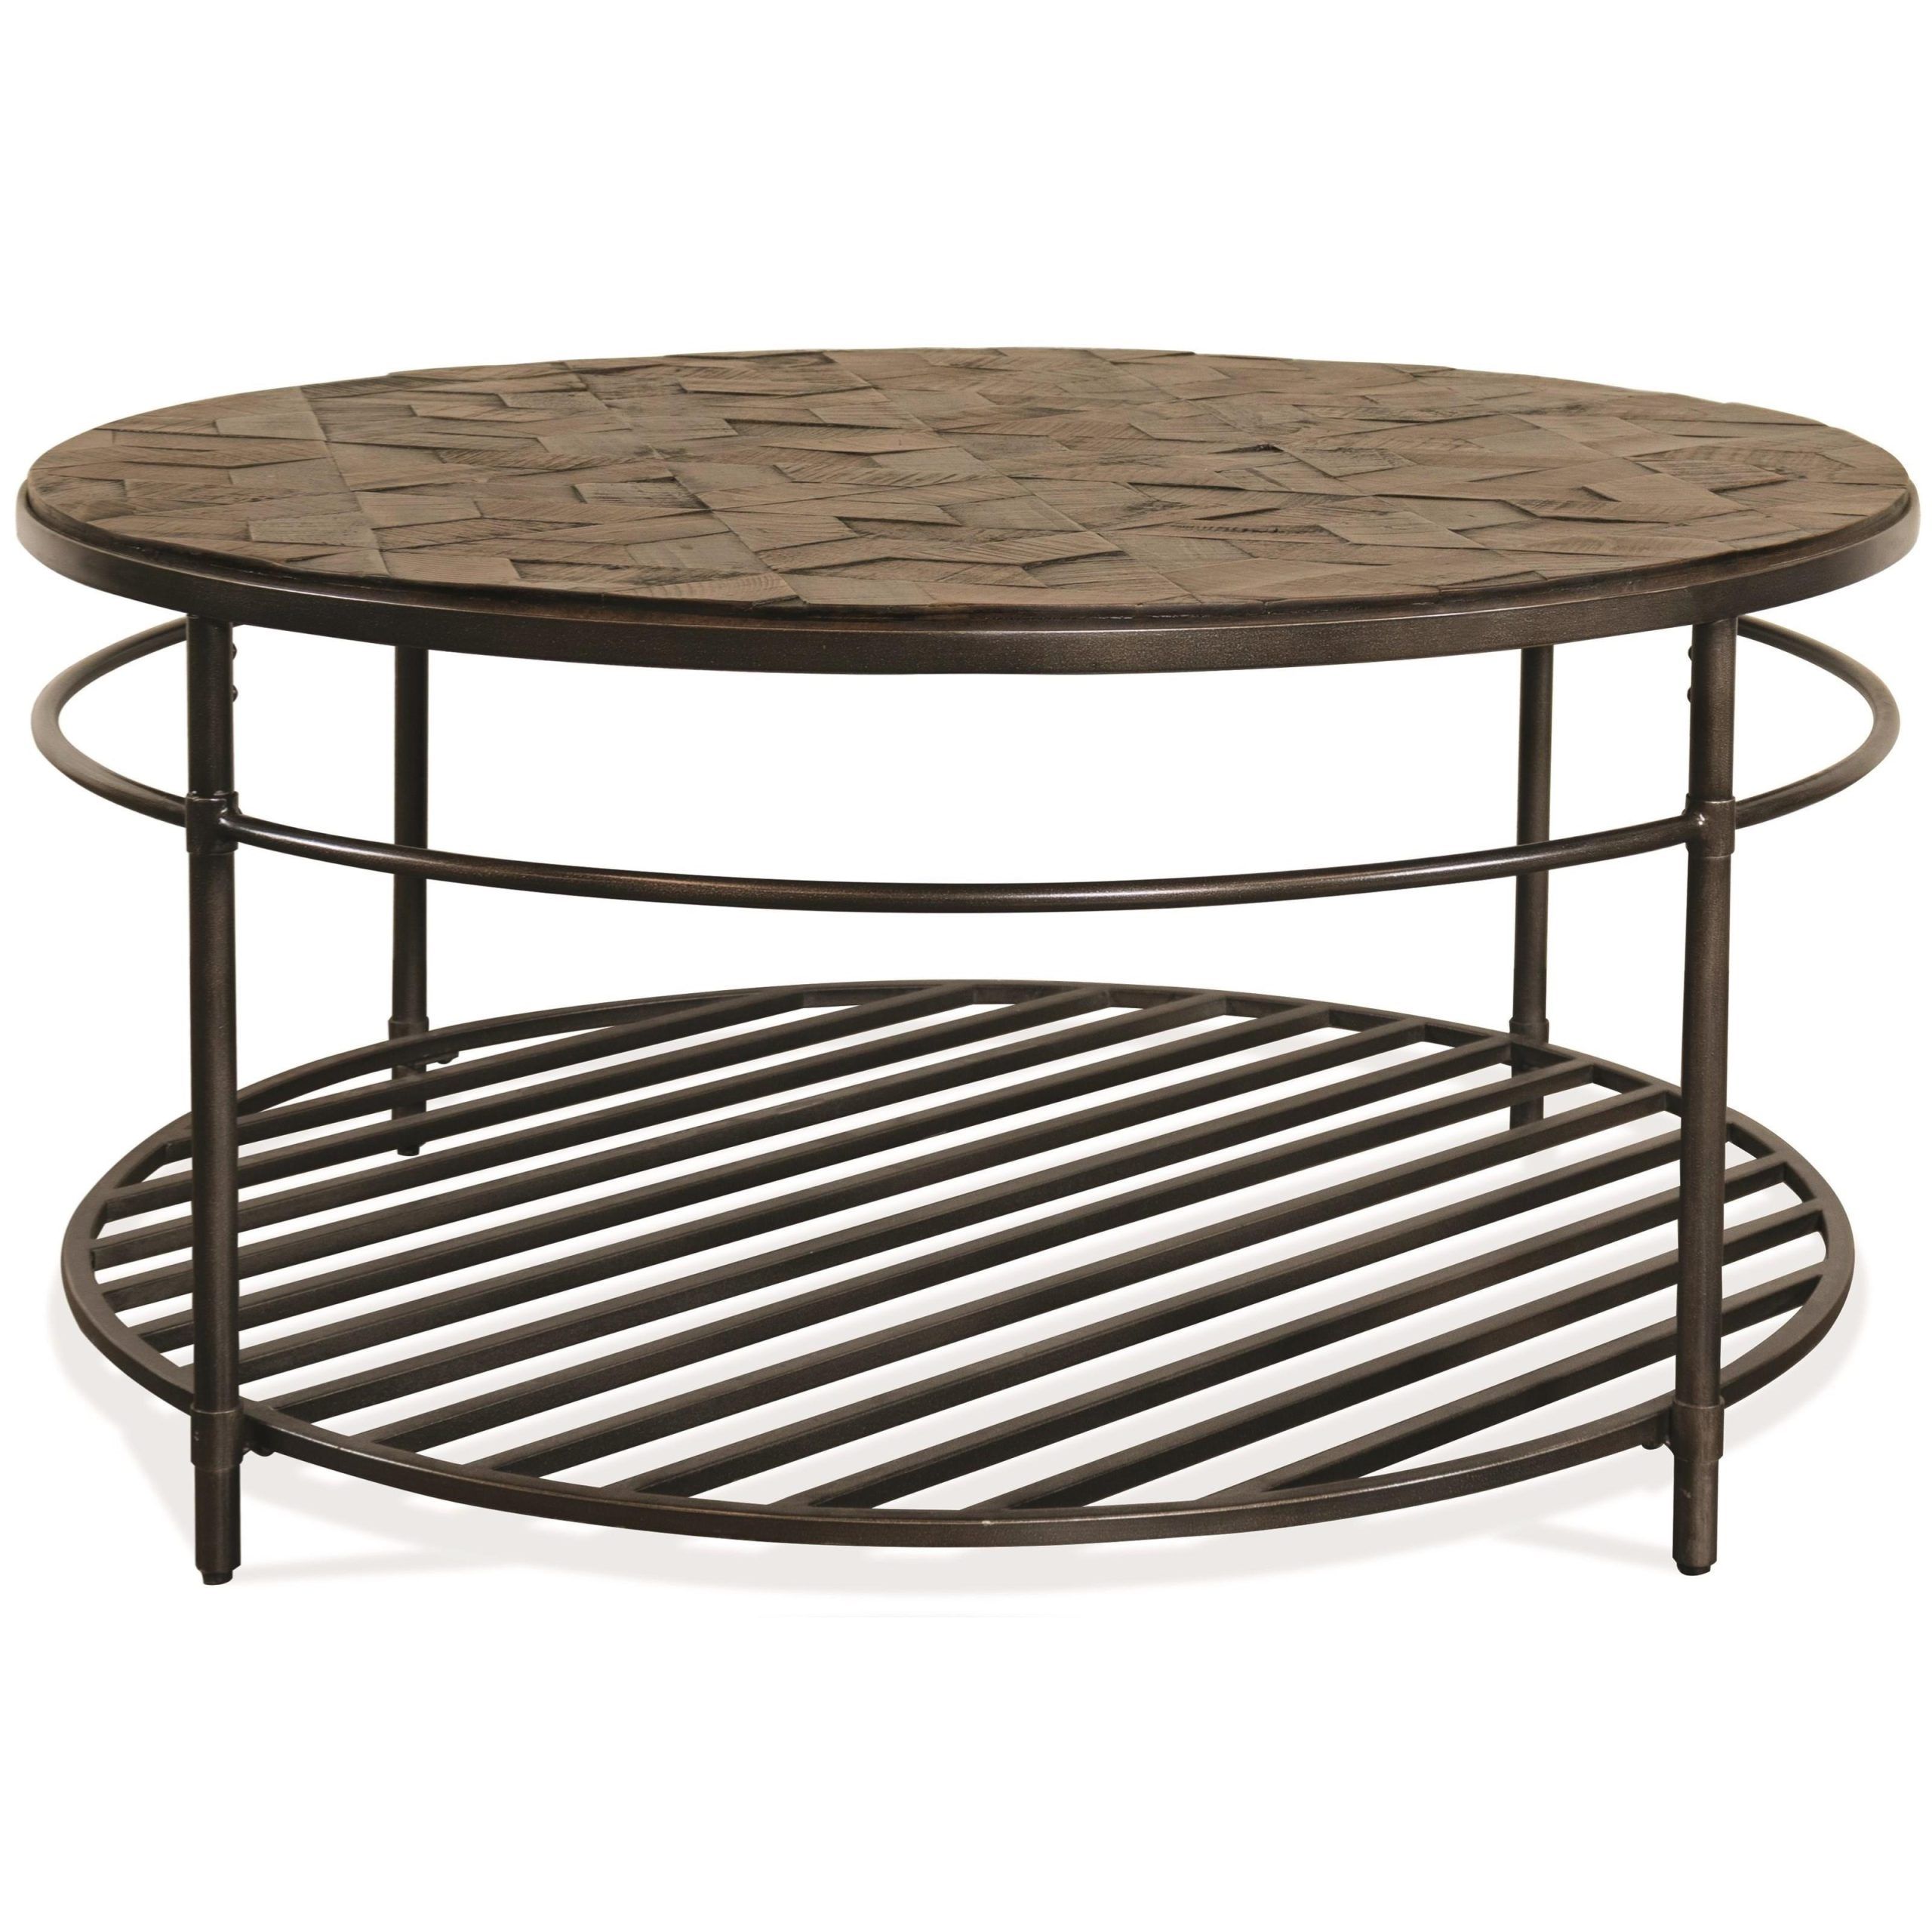 Riverside Furniture Hillcrest 1367345 Rustic Round Cocktail Table With Intended For Gray Coastal Cocktail Tables (View 14 of 20)